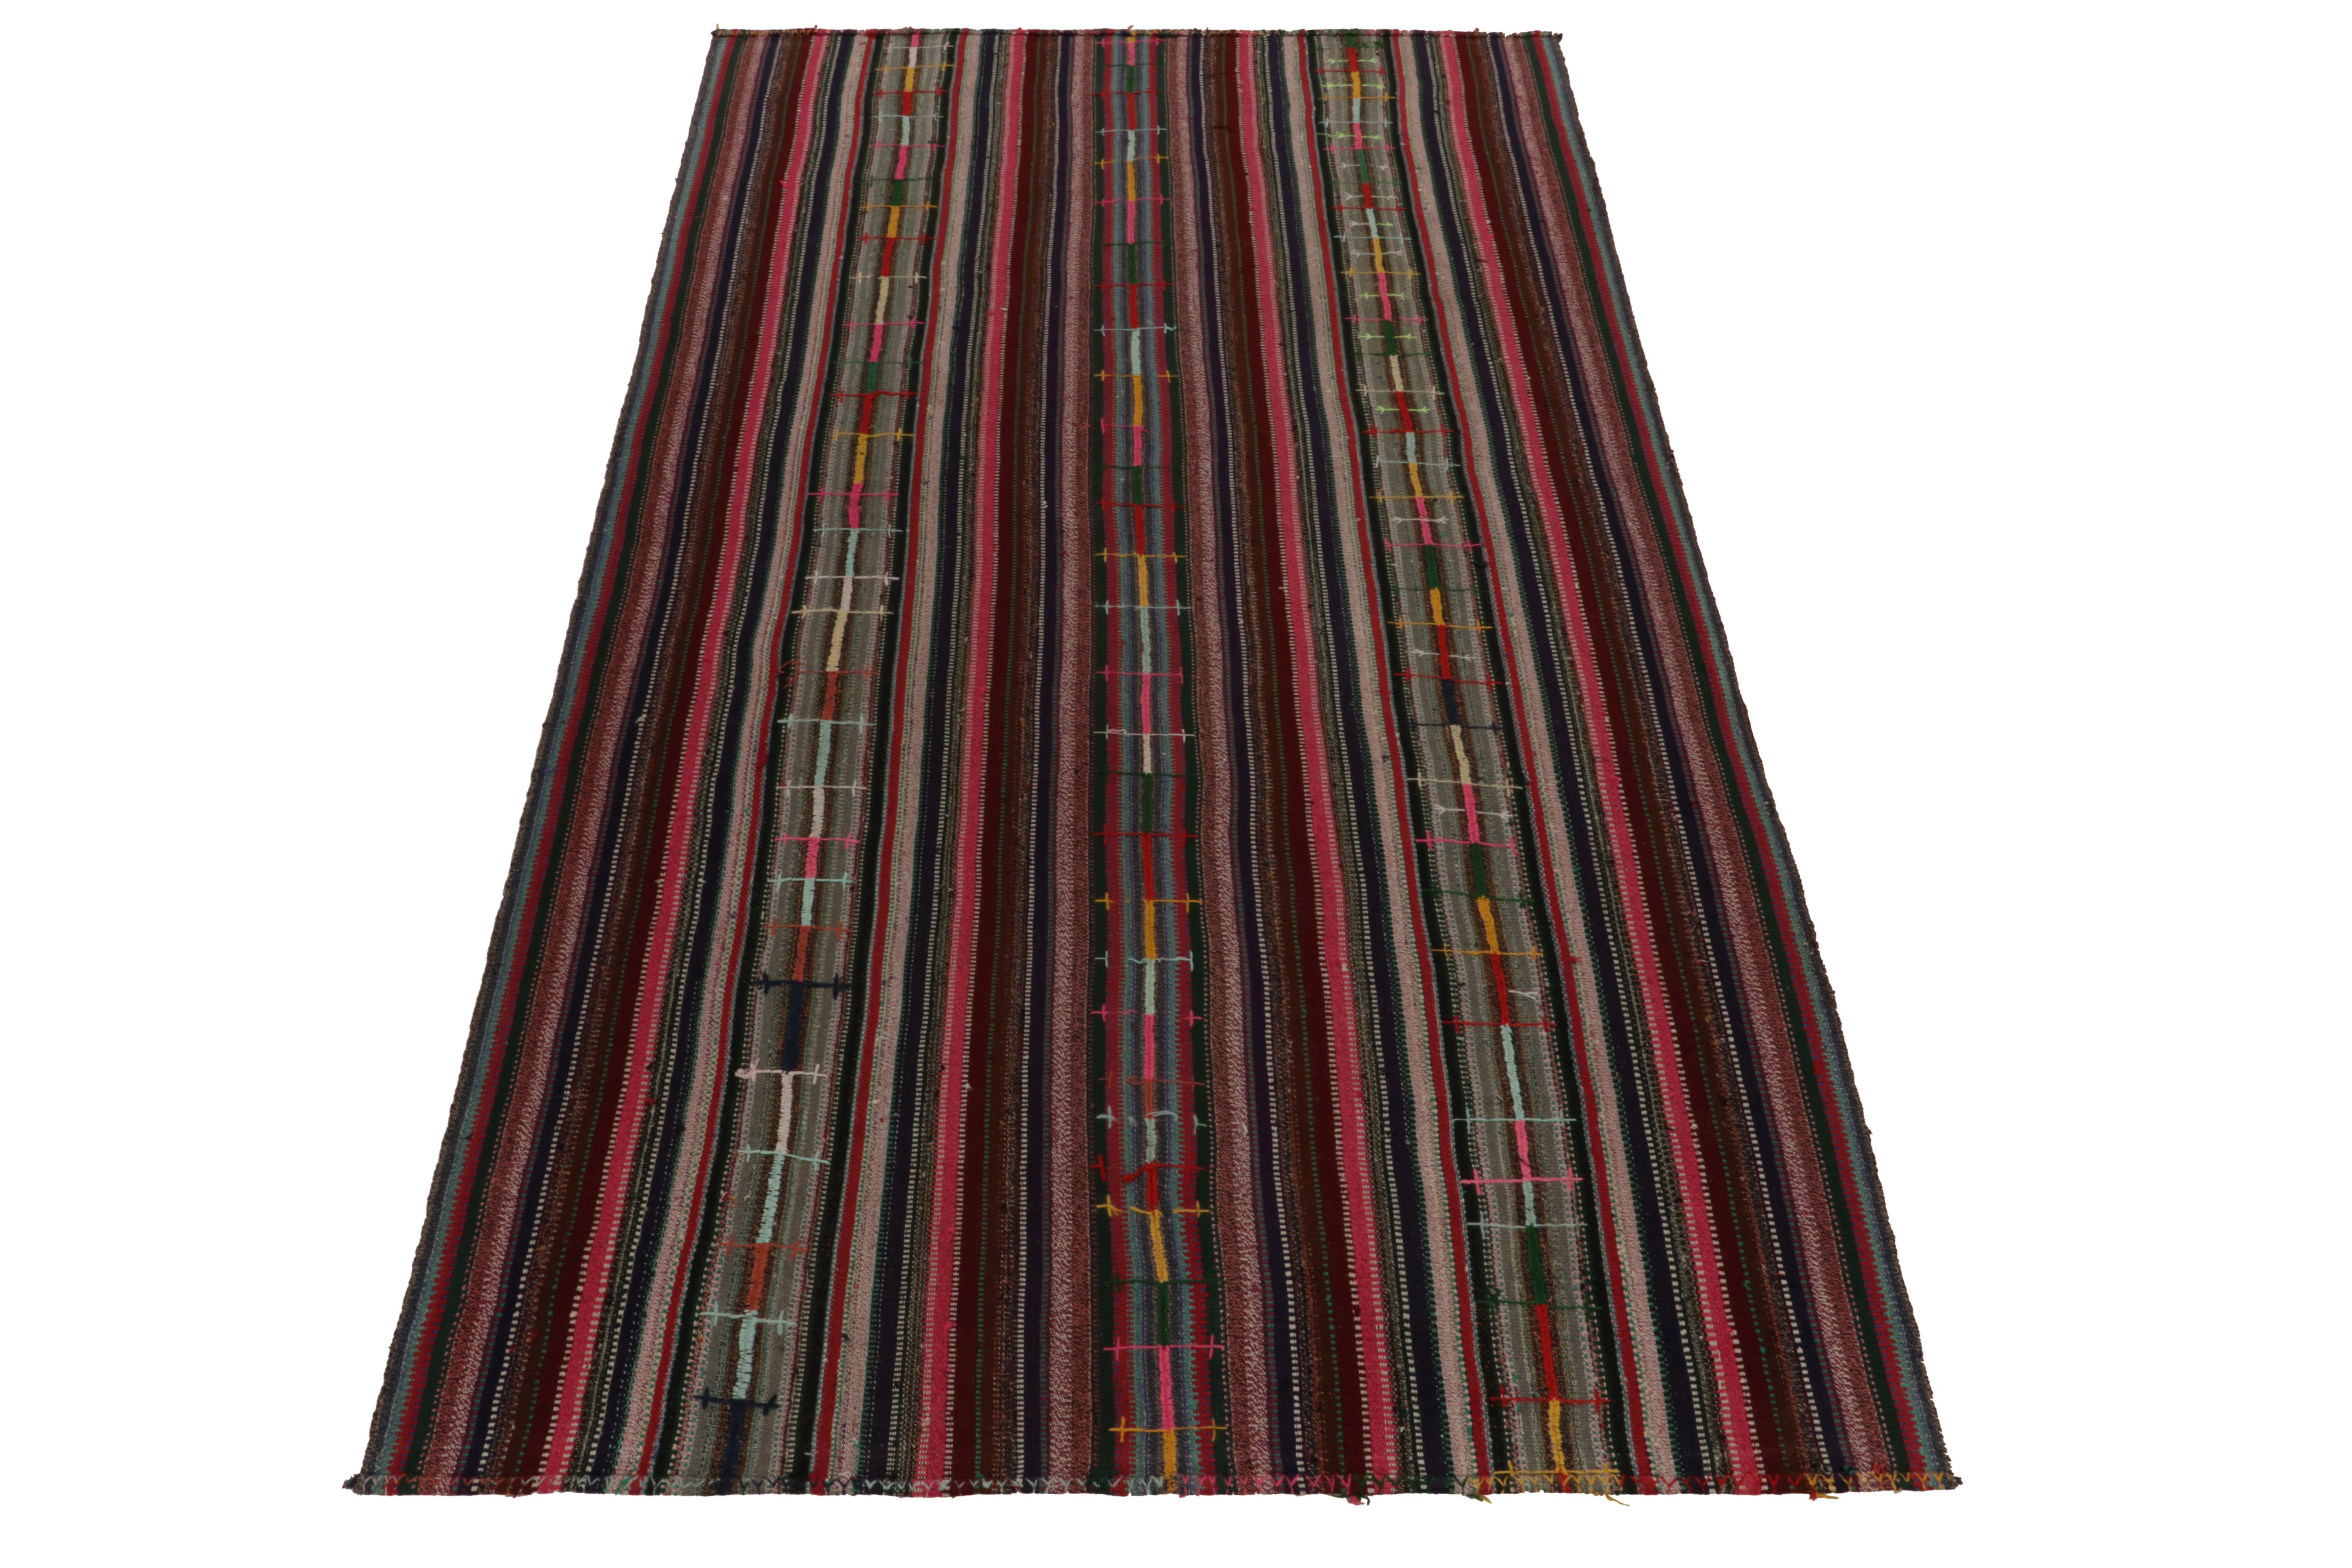 Originating from Turkey circa 1950-1960, a rare type of chaput kilim rug style now entering our Antique & Vintage selections. 

Characterized by fine detailing with the colors within the polychromatic stripes, the mature piece welcomes a departure